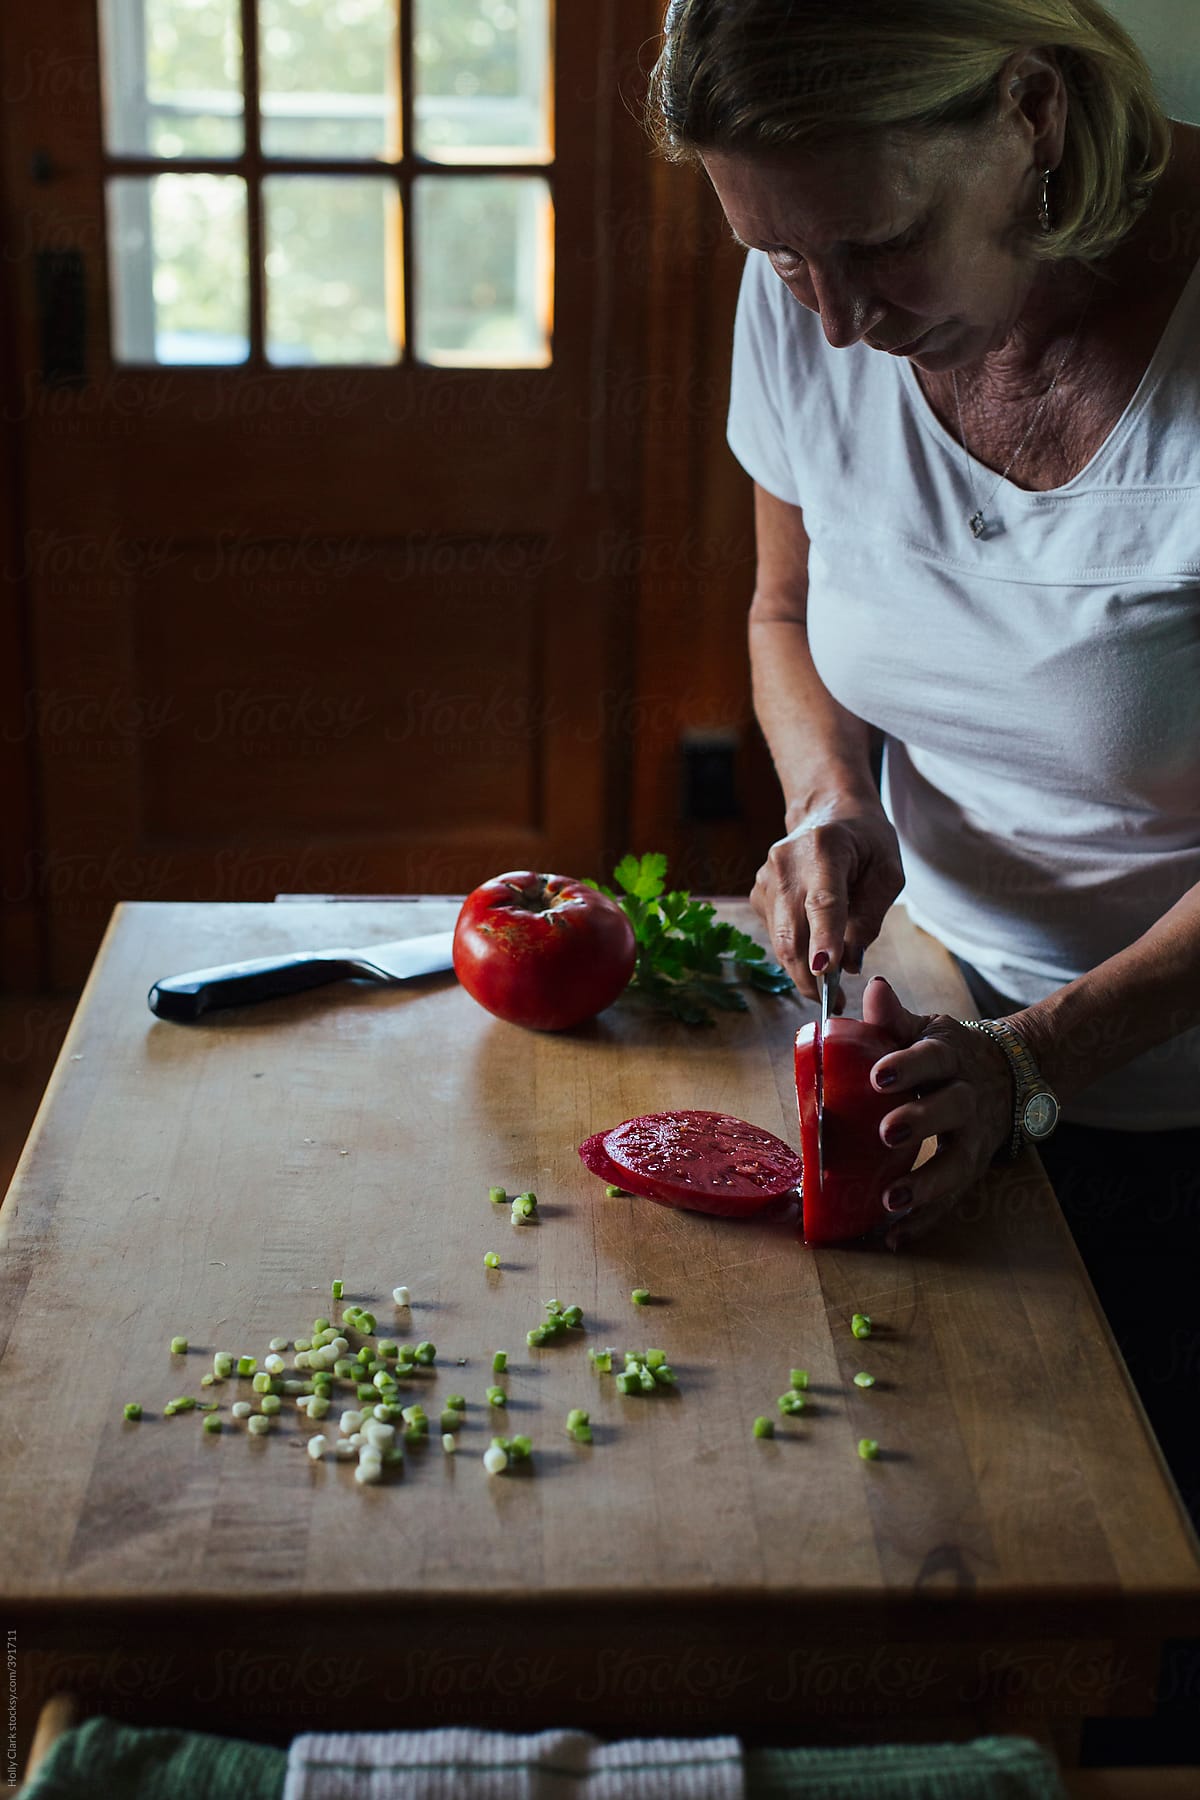 Woman slicing tomatoes in the kitchen.